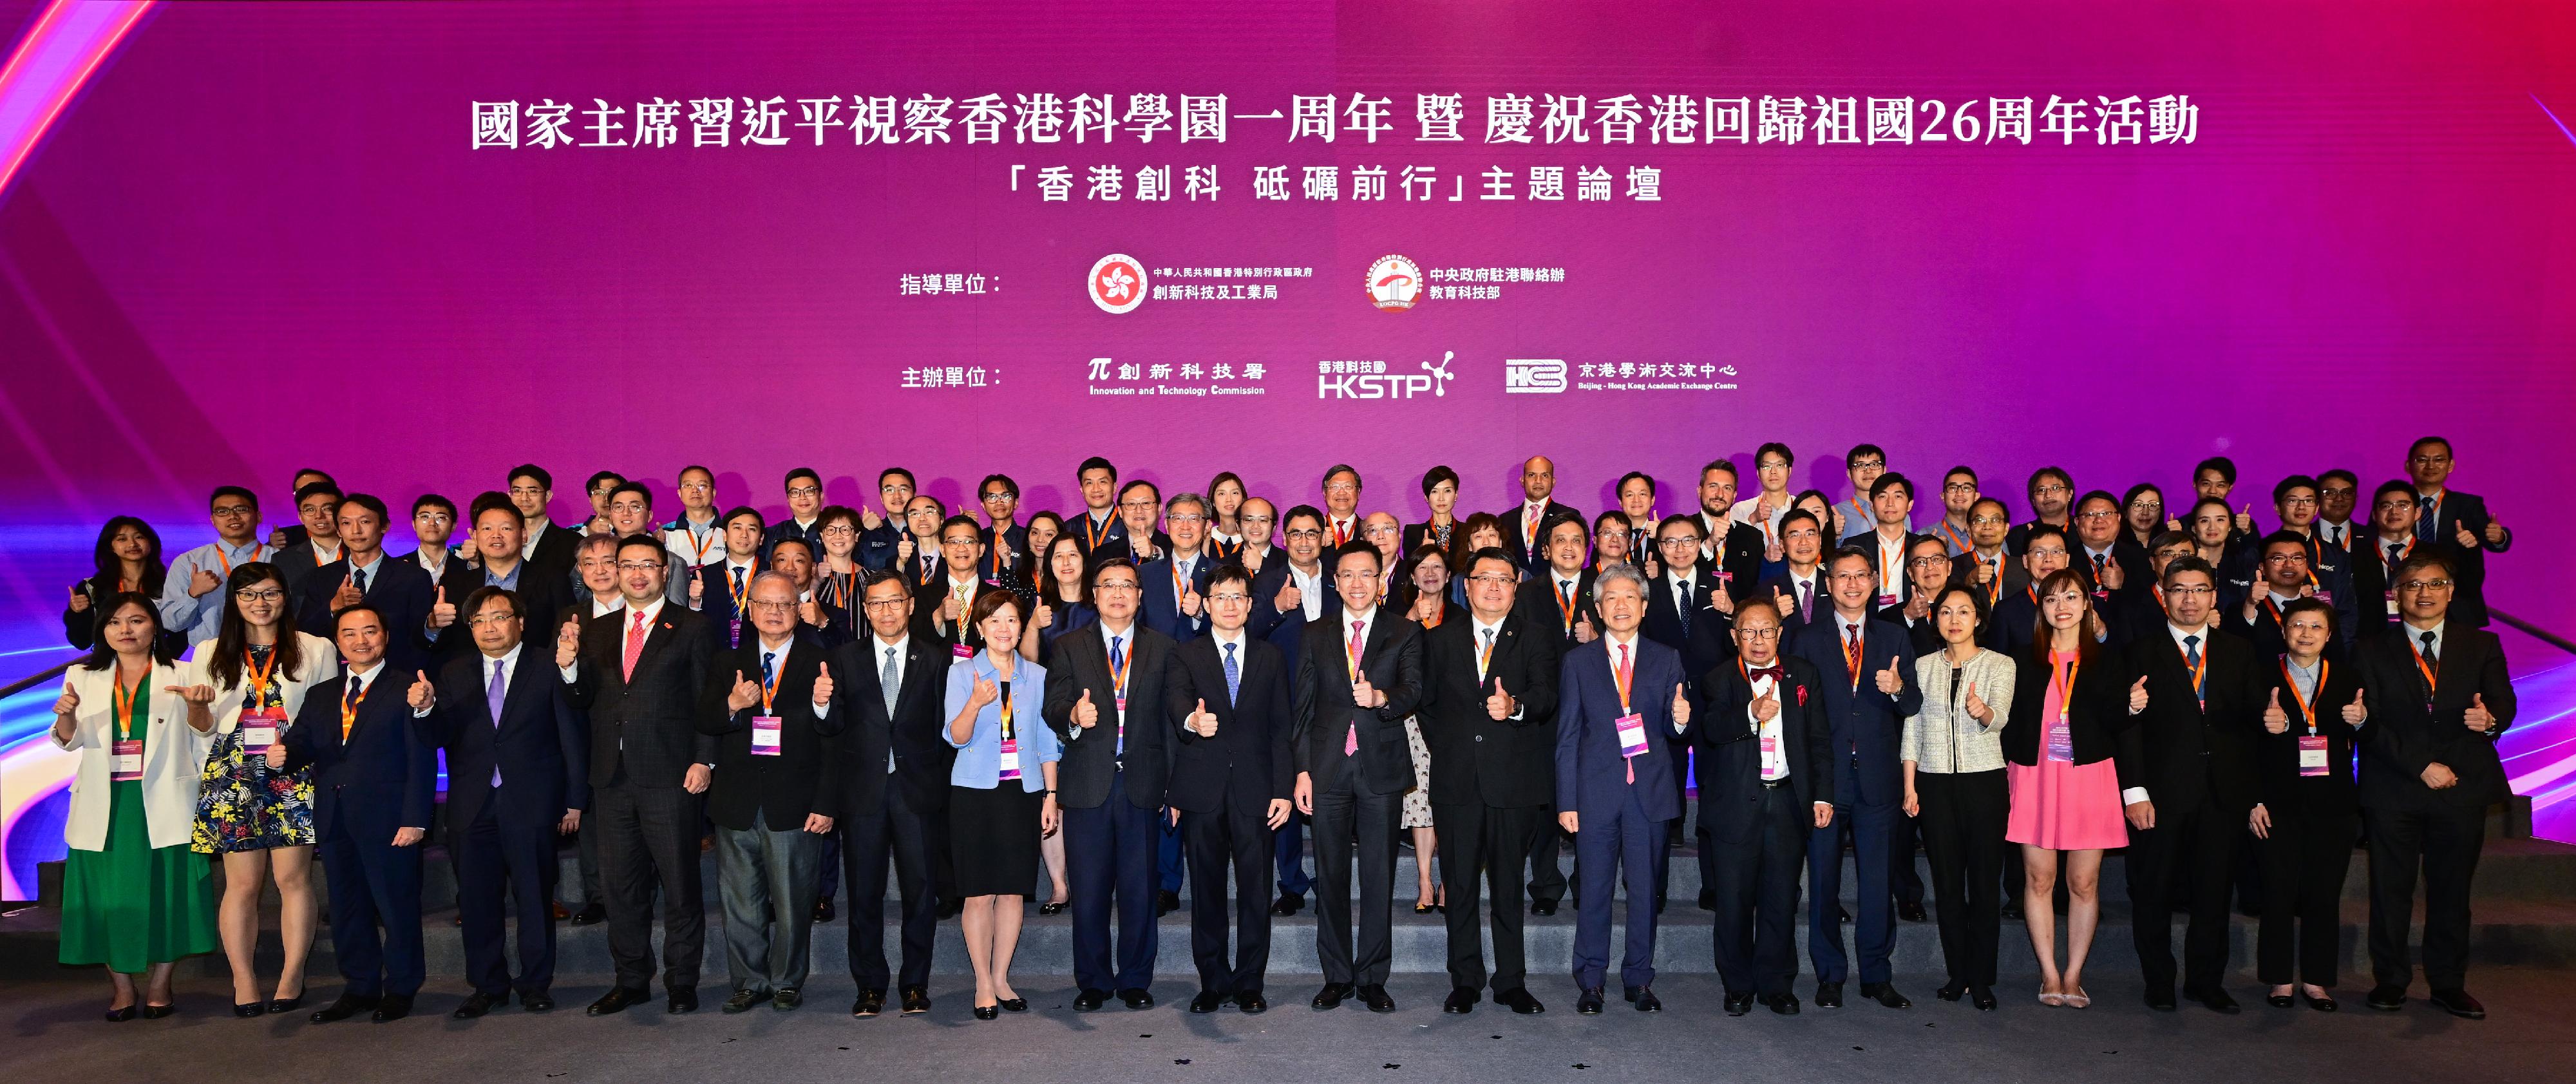 Hong Kong I&T Strives Ahead forum to mark the anniversary of President Xi Jinping's visit to the Hong Kong Science Park and celebrate the 26th anniversary of the establishment of the Hong Kong Special Administrative Region was concluded successfully today (June 30). Photo shows the Secretary for Innovation, Technology and Industry, Professor Sun Dong (front row, 10th right); the Director-General of the Department of Educational, Scientific and Technological Affairs of the Liaison Office of the Central People's Government in the Hong Kong Special Administrative Region, Dr Wang Weiming (front row, 10th left); the Chairman of the Hong Kong Science and Technology Parks Corporation, Dr Sunny Chai (front row, ninth right); the Permanent Secretary for Innovation, Technology and Industry, Mr Eddie Mak (front row, sixth right); the Under Secretary for Innovation, Technology and Industry, Ms Lillian Cheong (front row, fourth right); the Commissioner for Innovation and Technology, Mr Ivan Lee (front row, fourth left); and the Chief Executive Officer of the Hong Kong Science and Technology Parks Corporation, Mr Albert Wong (front row, seventh left), with the awardees and other guests.